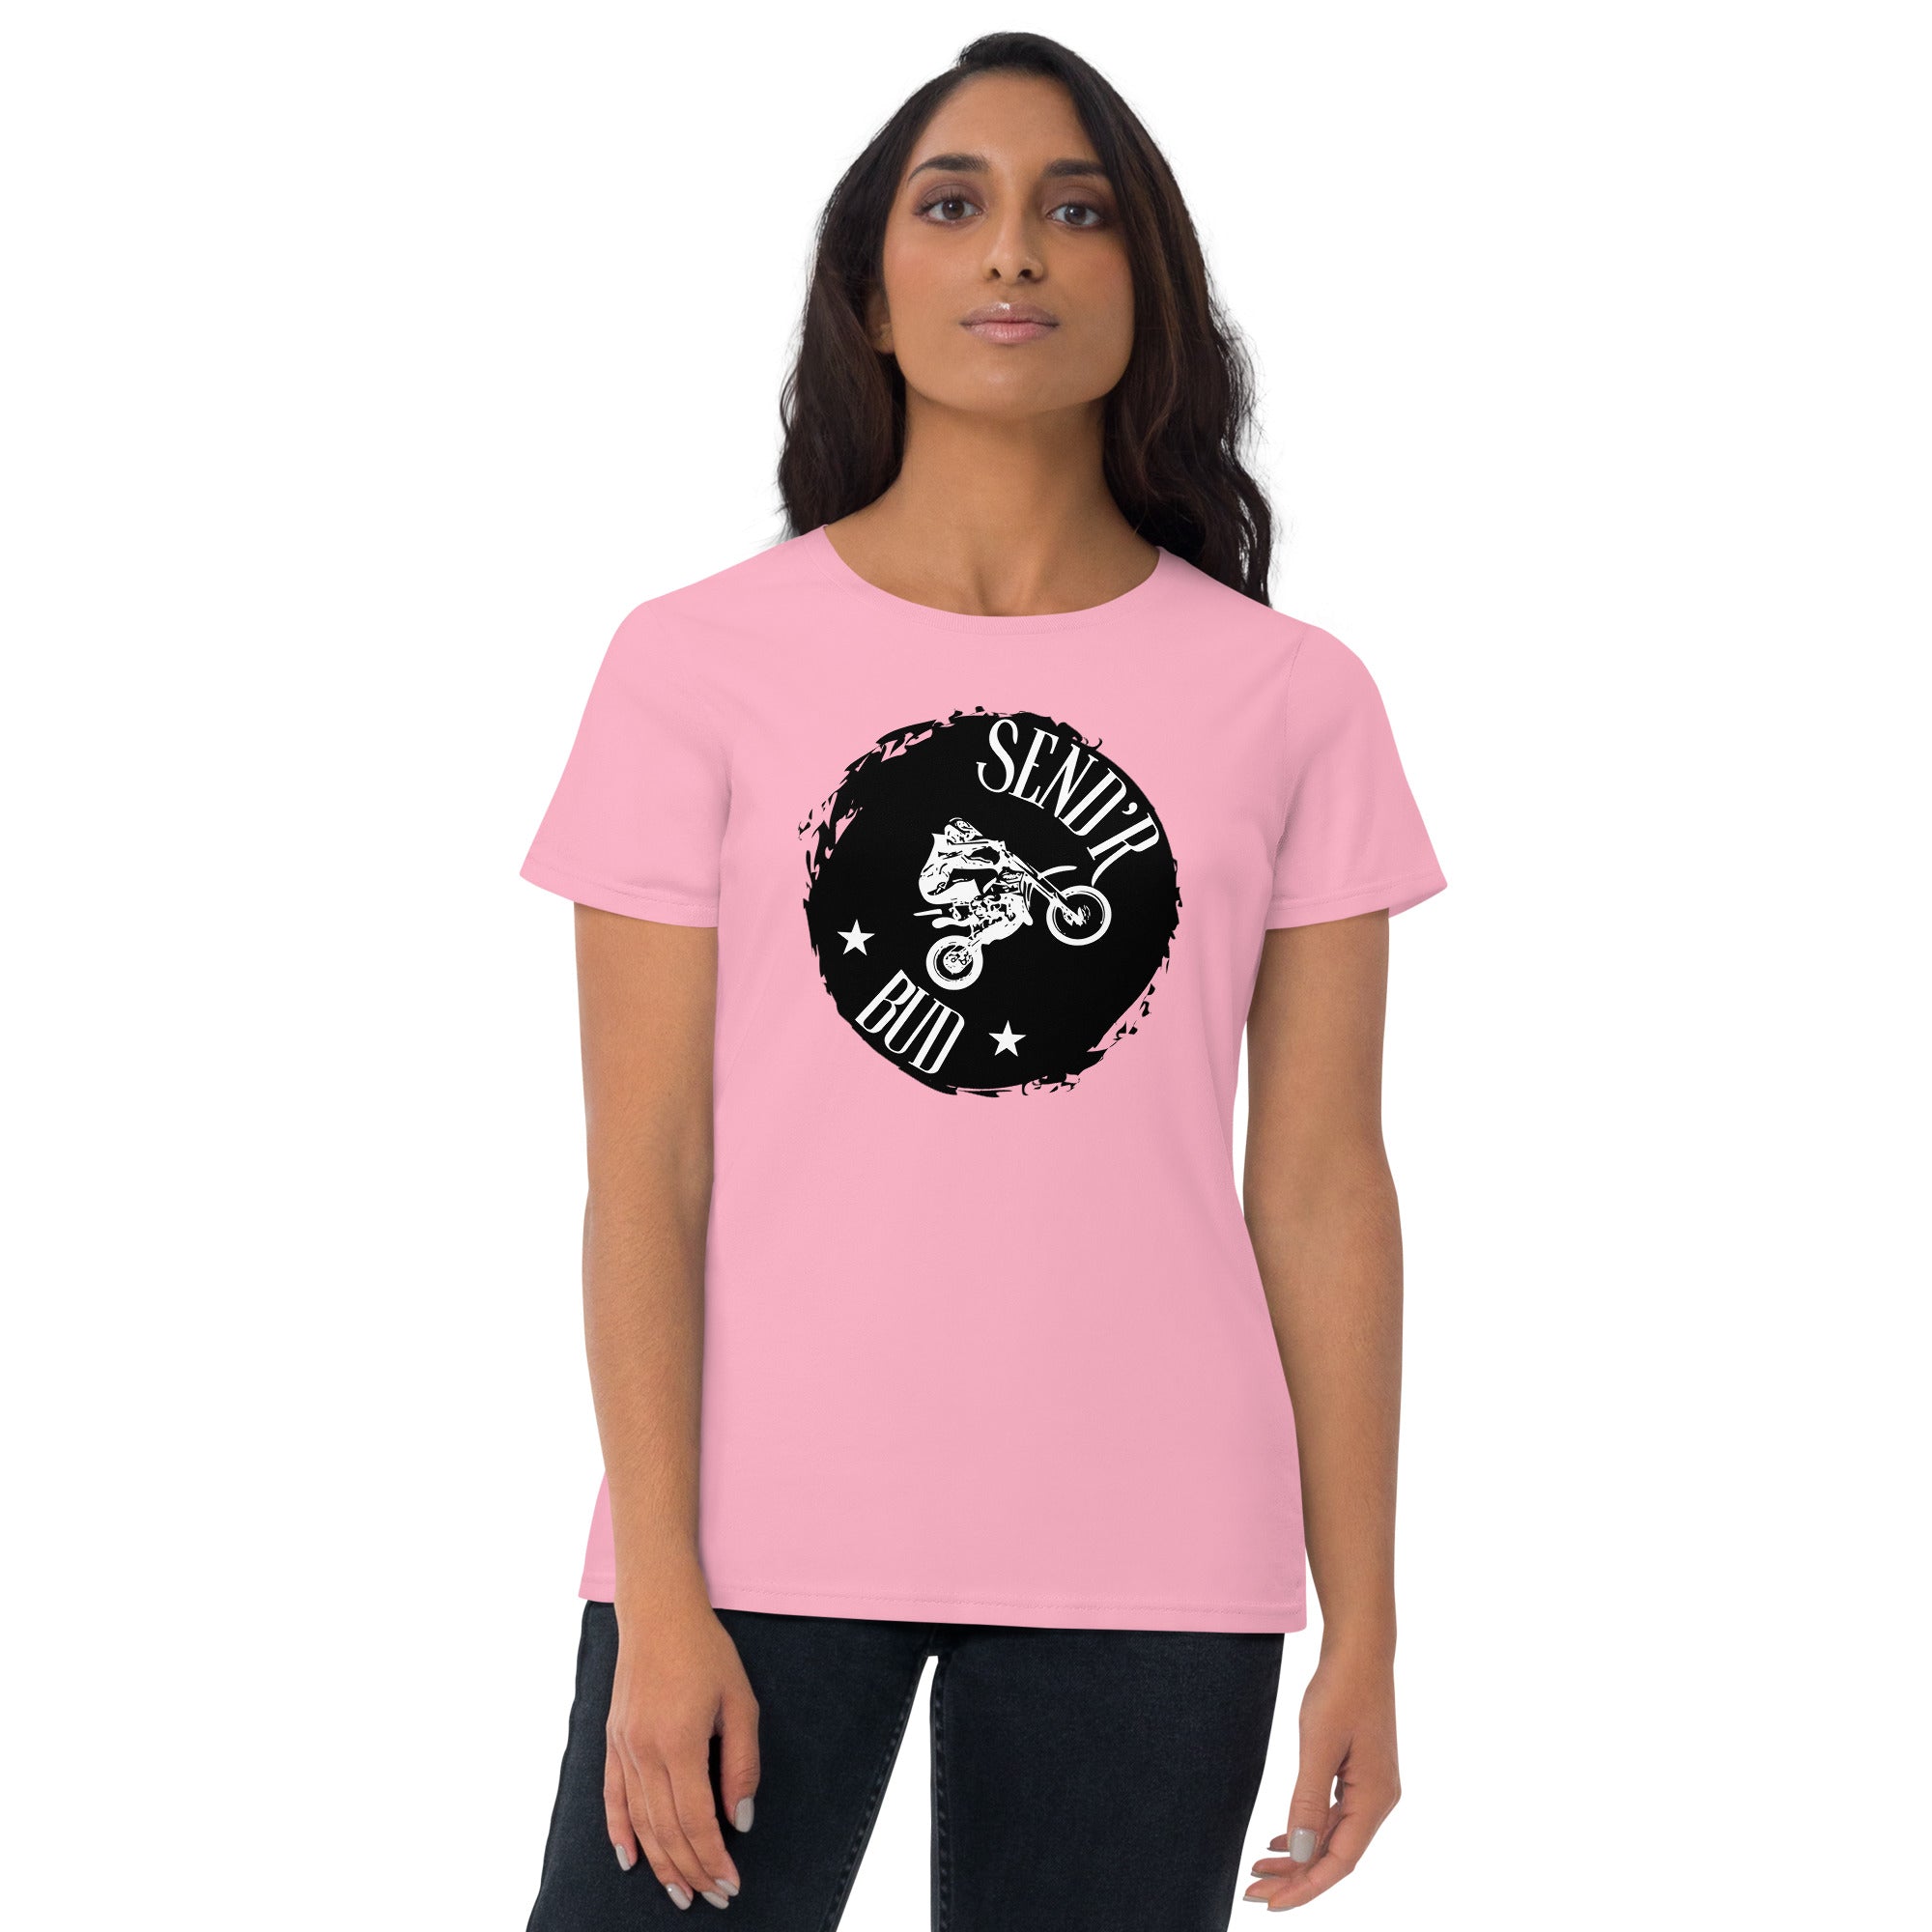 Send'r Bud Women's Fitted T-Shirt